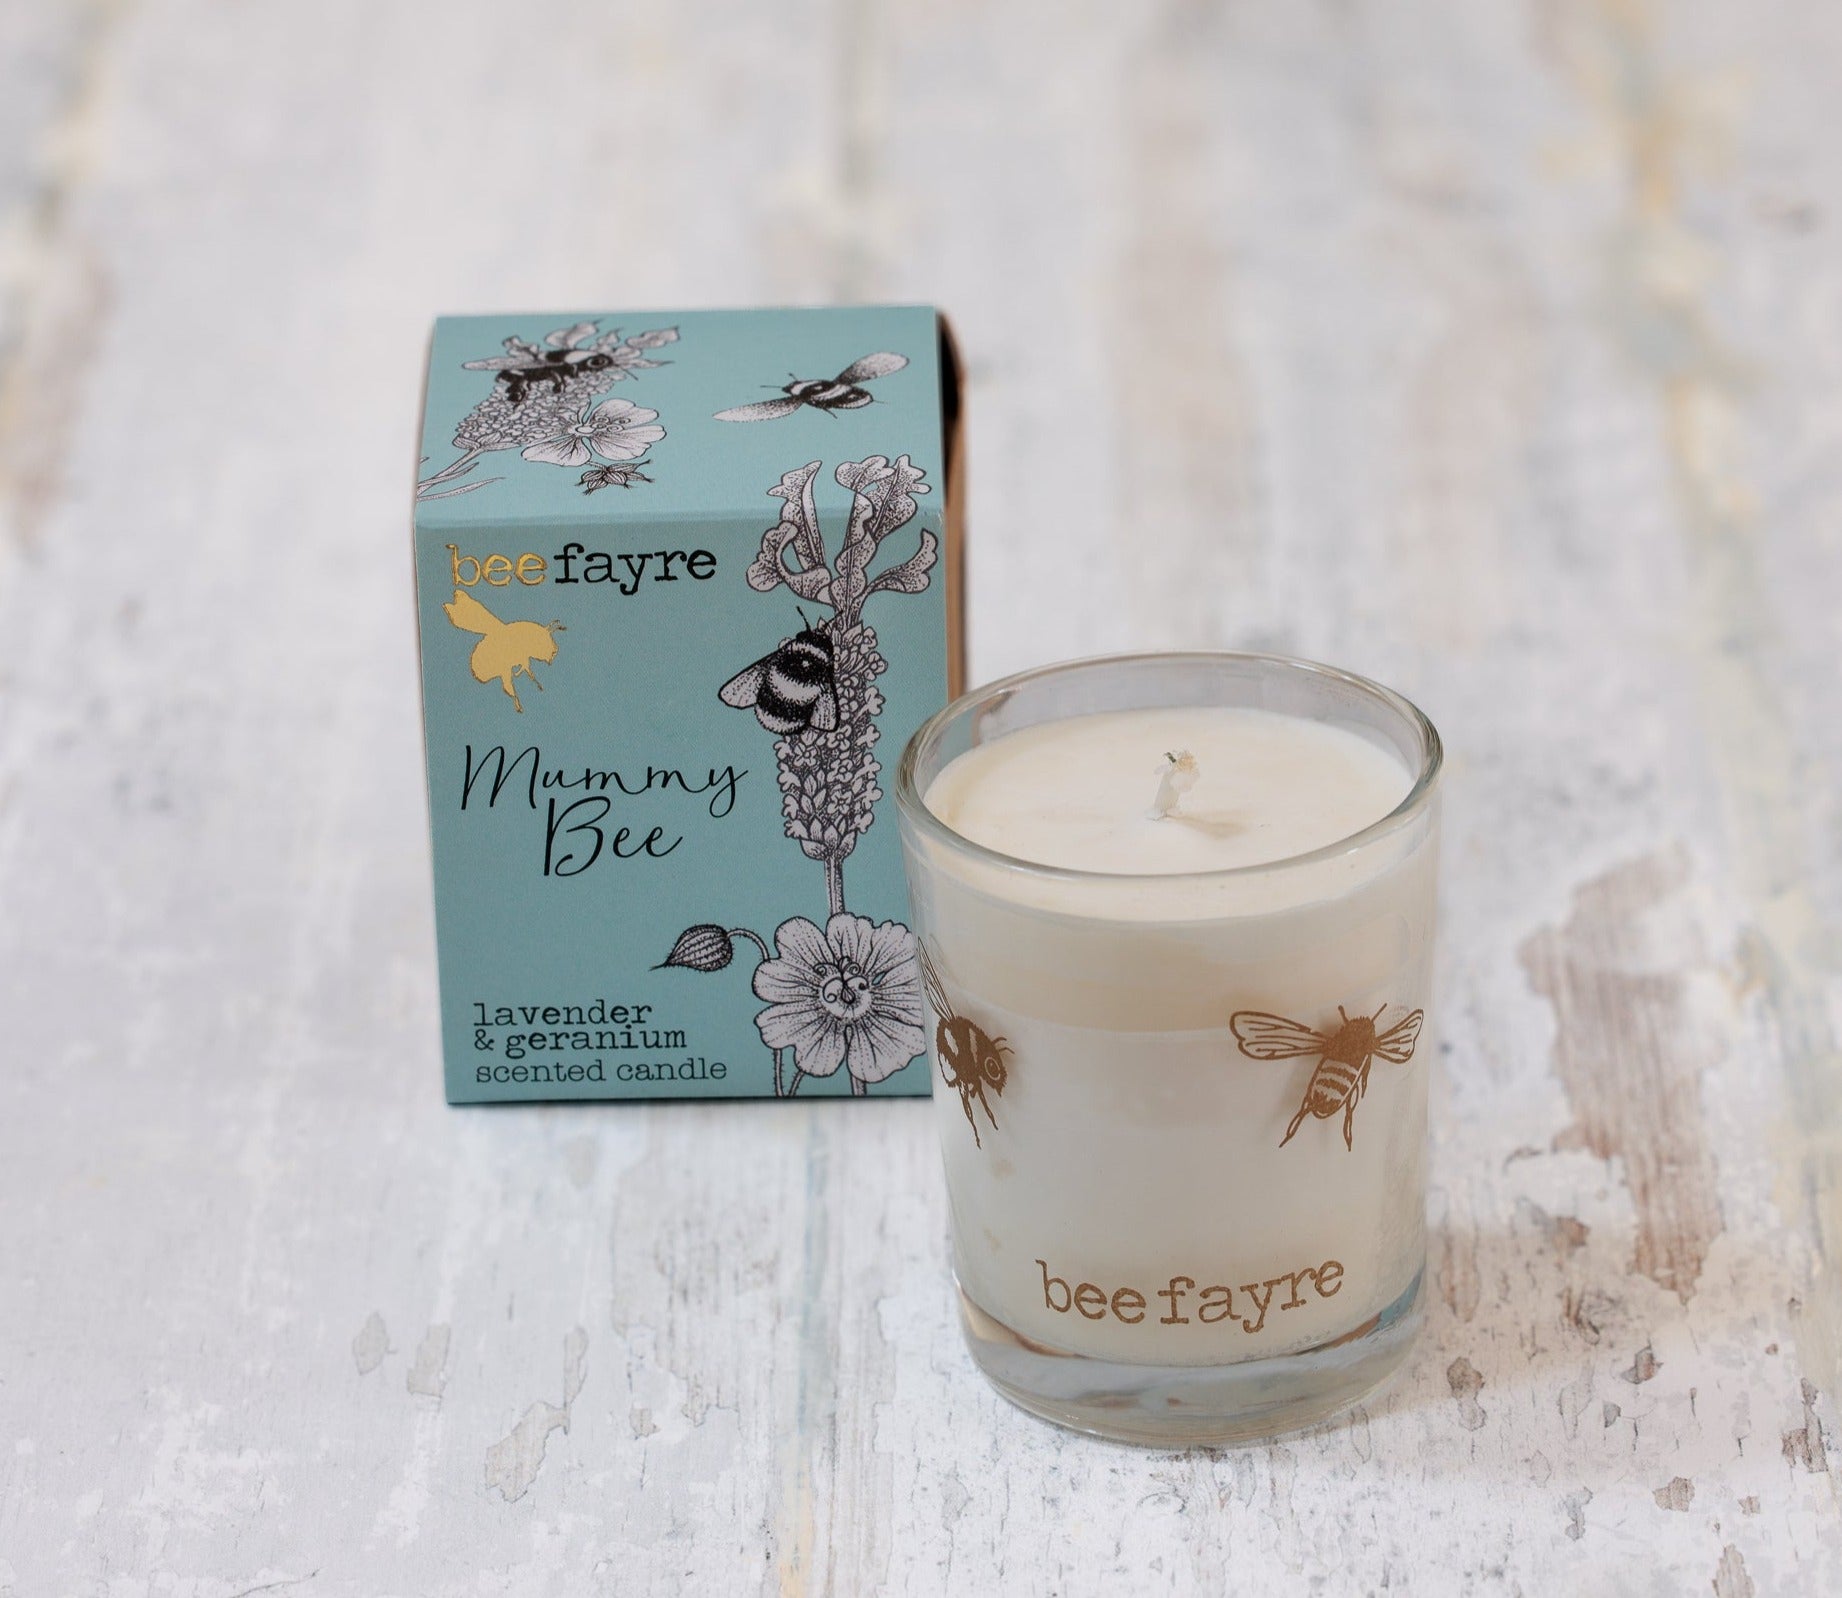 An image of Small Candle -Lavender & Geranium